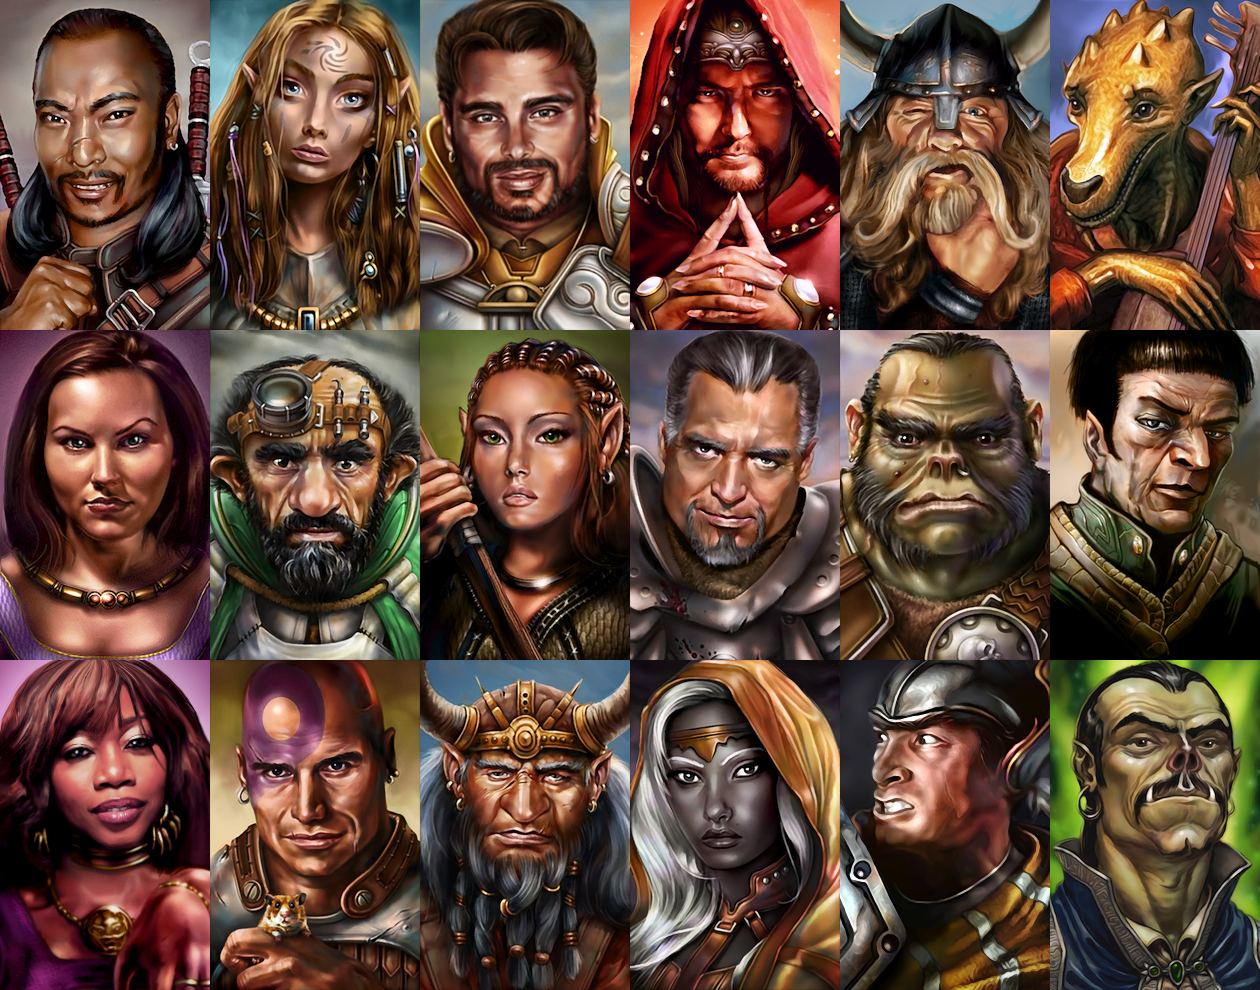 These are various NPC portraits from Baldur's Gate 1 and 2, as well as...